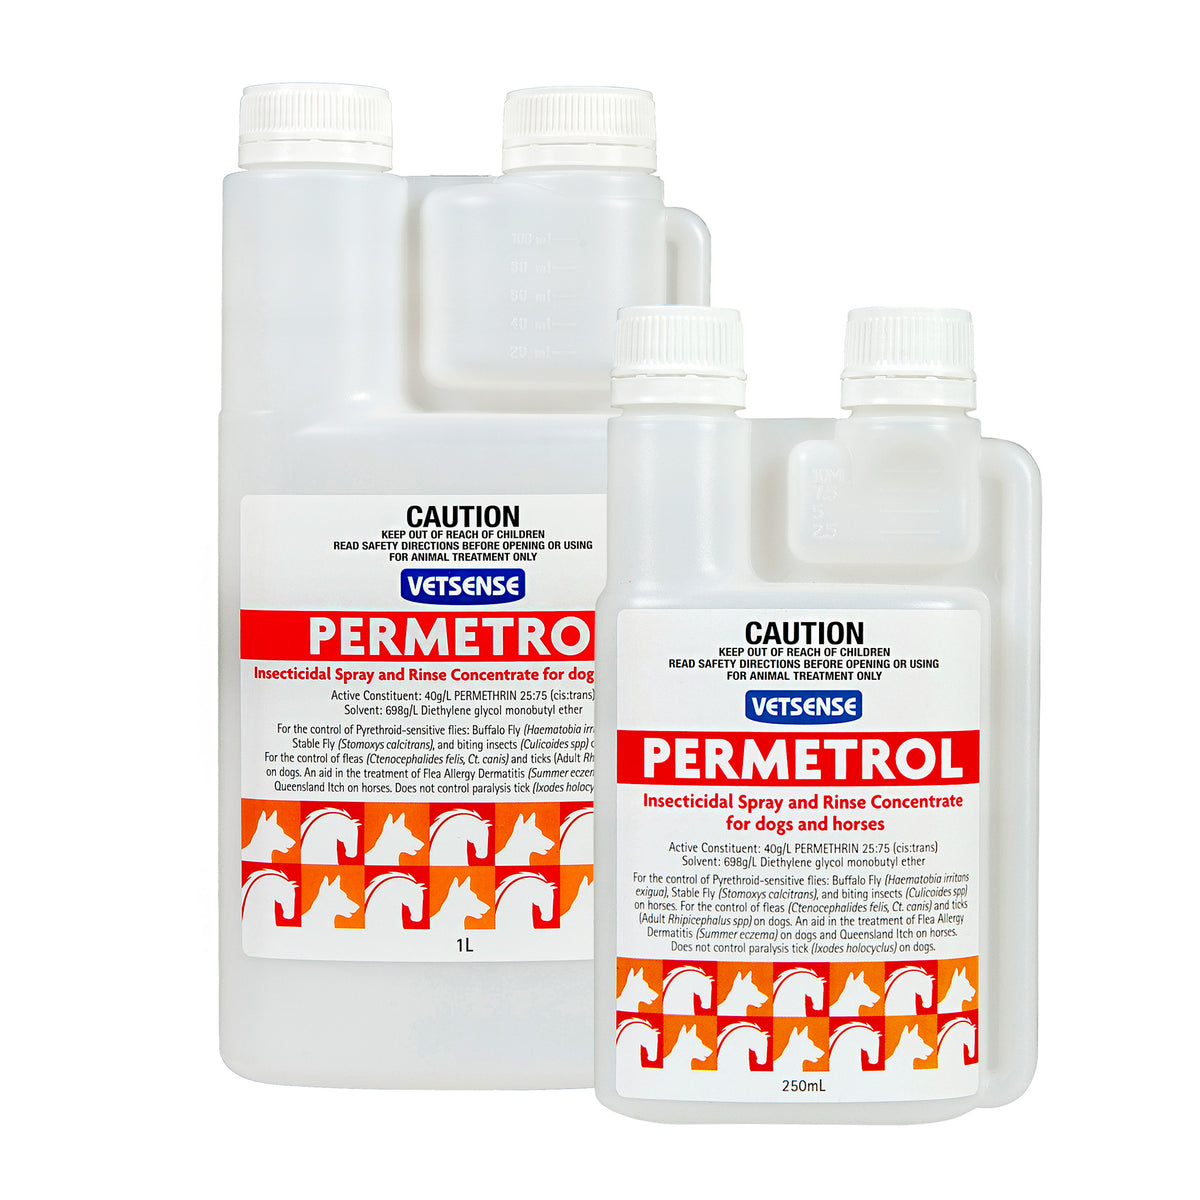 Permetrol Insecticidal Spray Concentrate for Dogs &amp; Horses